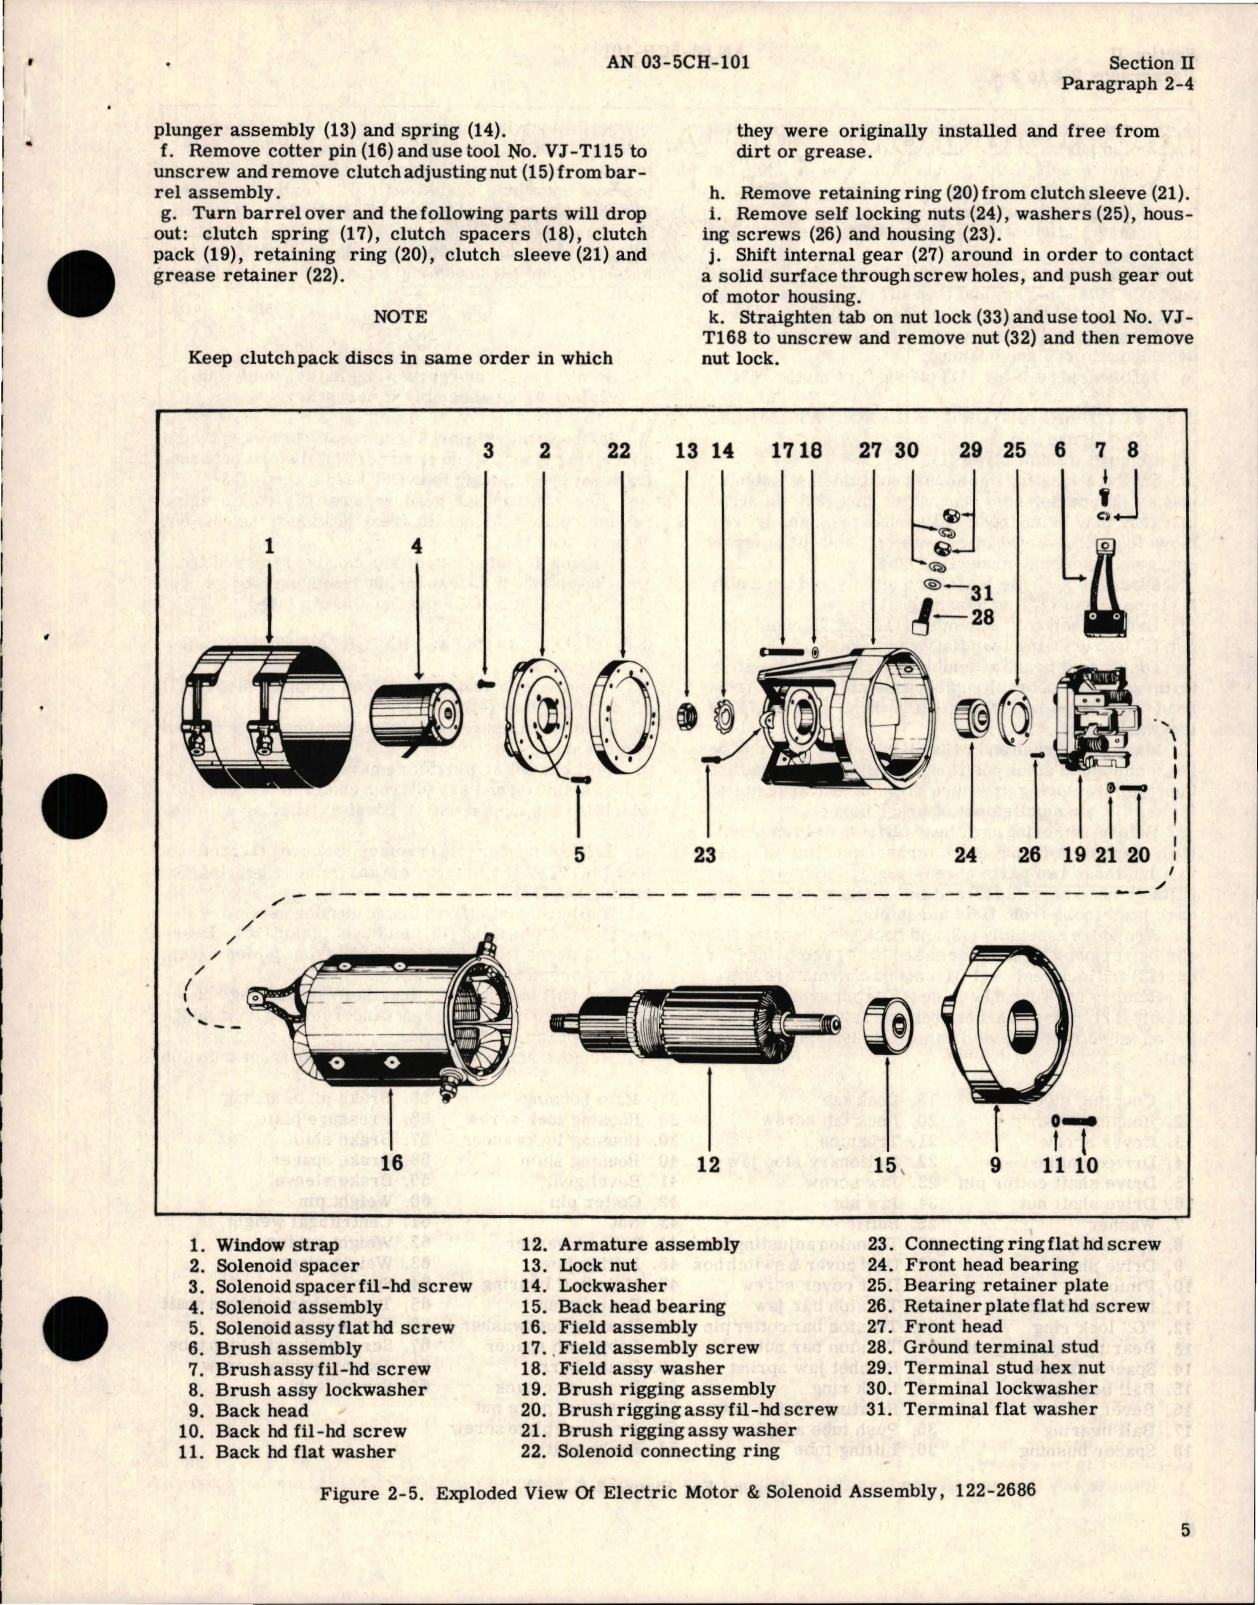 Sample page 7 from AirCorps Library document: Overhaul Instructions for Main Landing Gear Actuator - Part VJ-550